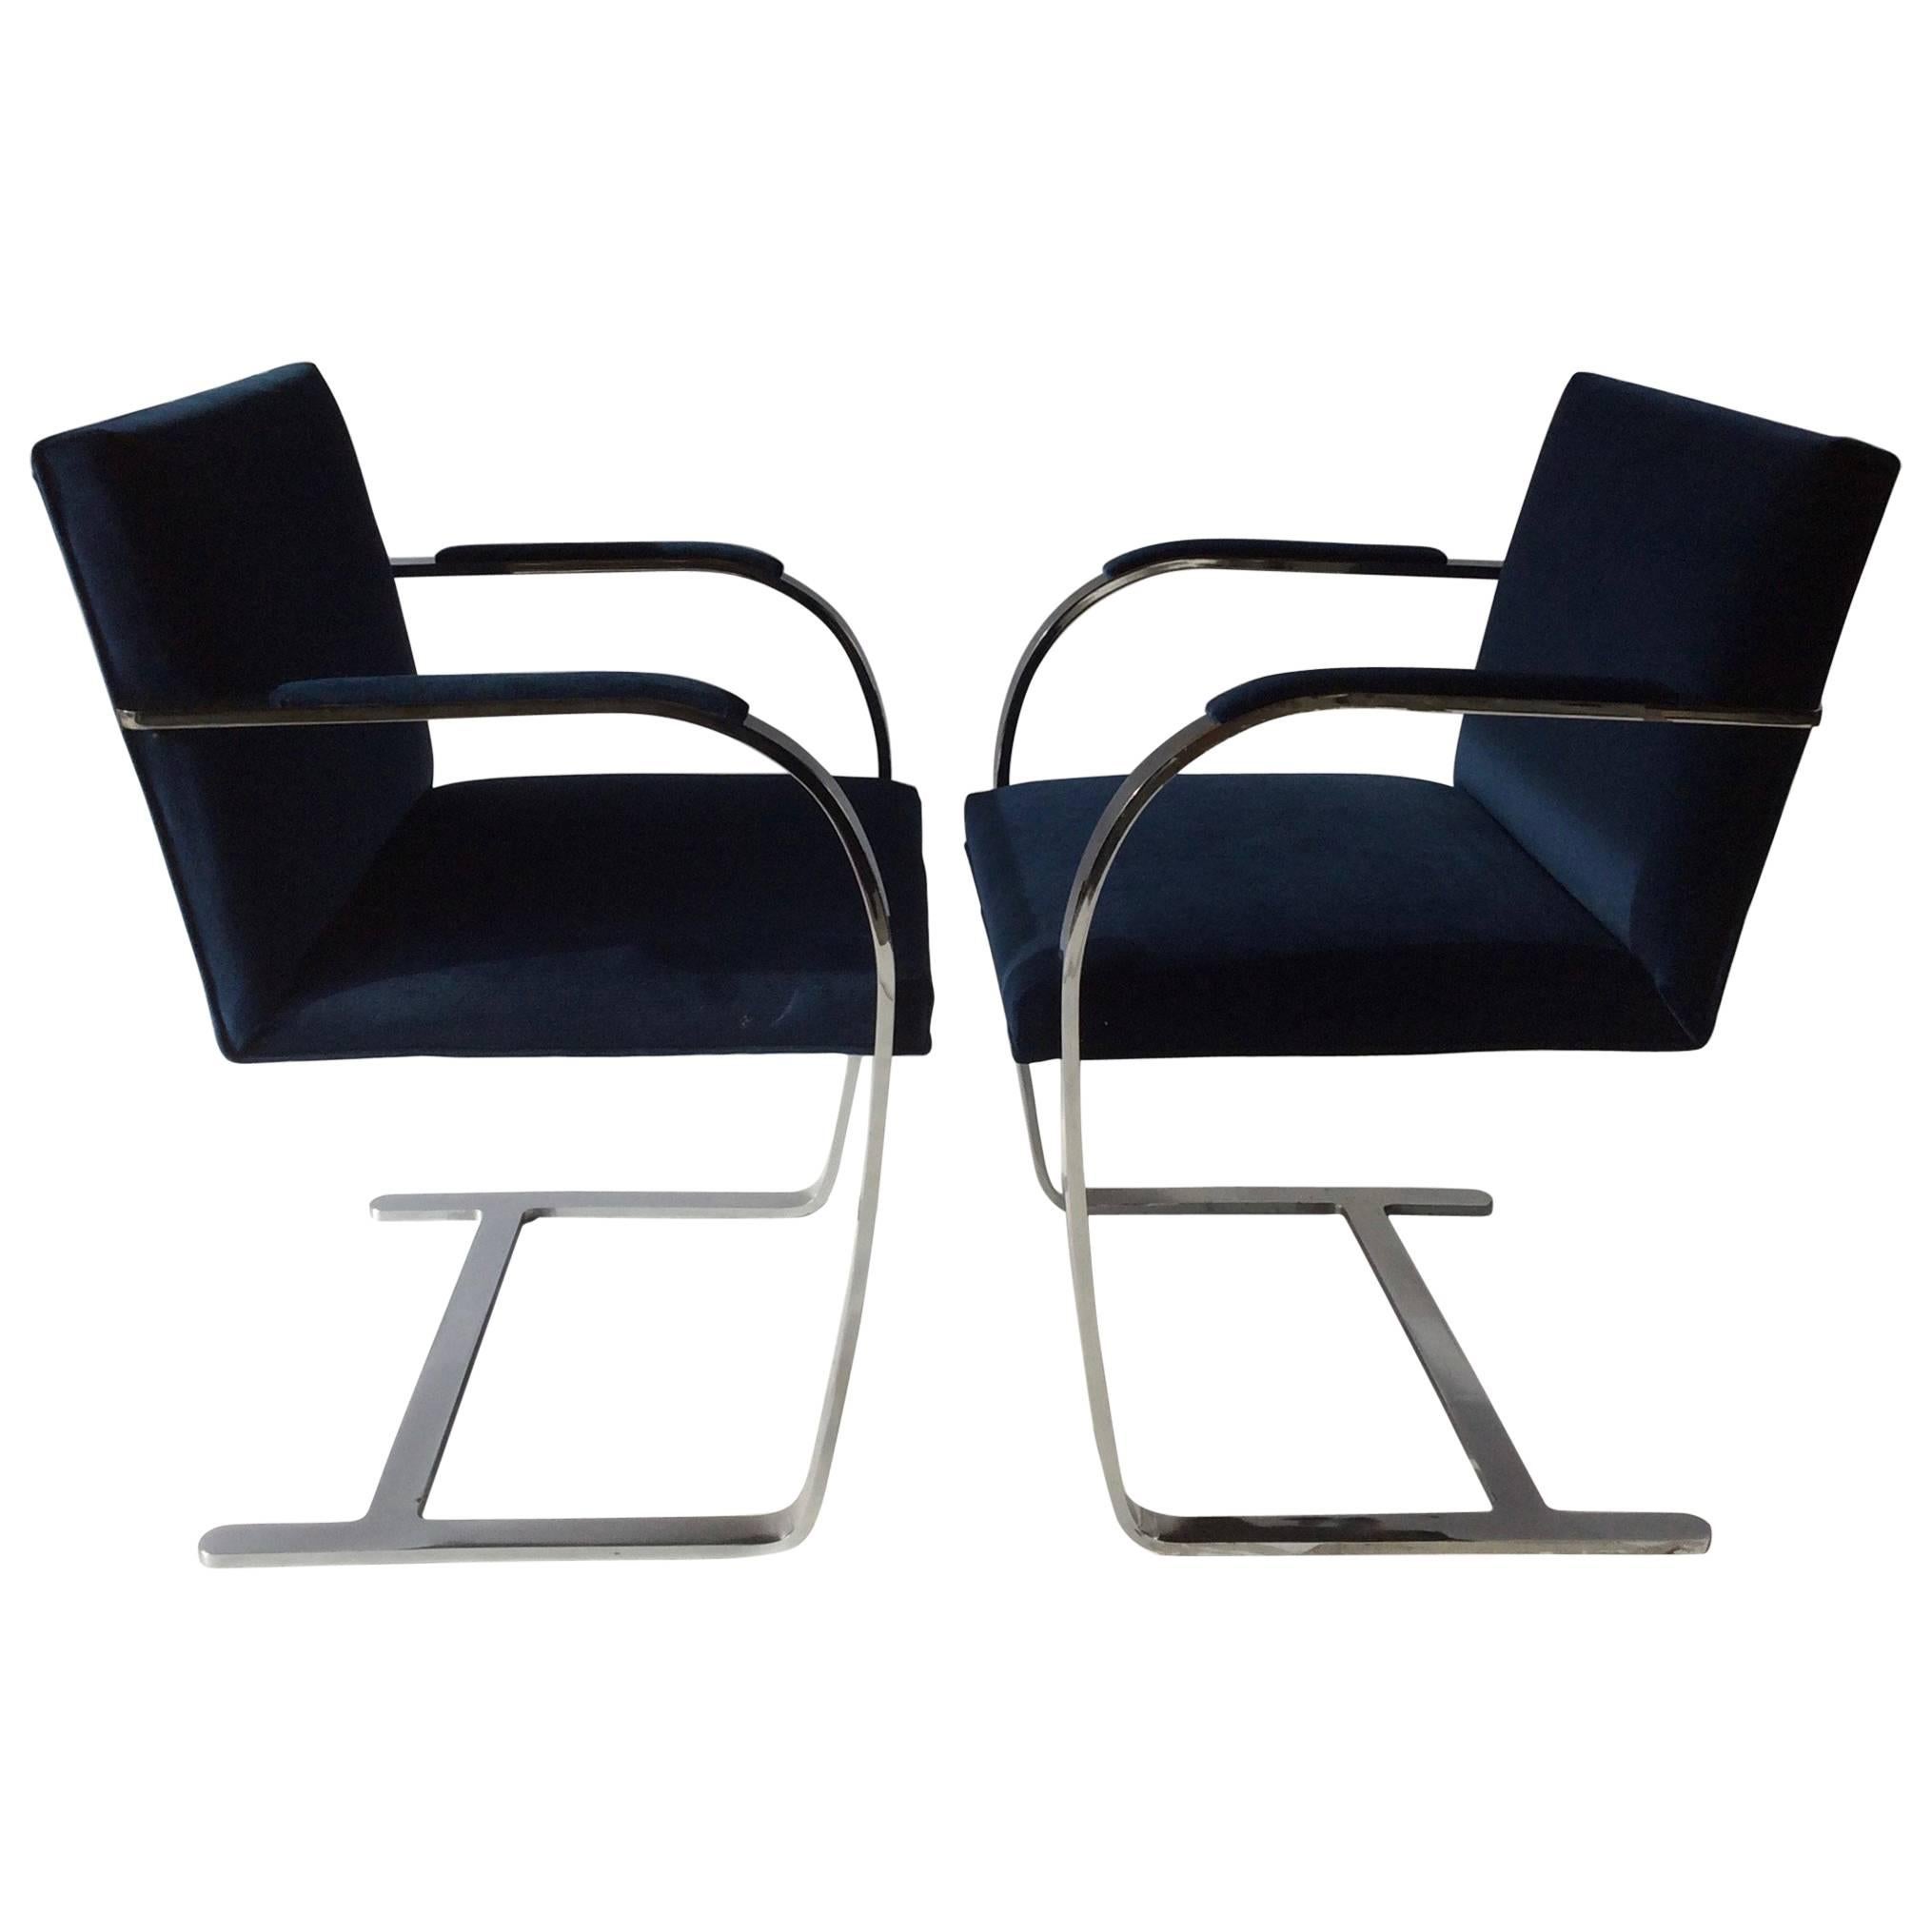 Mies Van Der Rohe, BRNO Flat Bar Chrome Cantilevered Chairs, New Upholstery